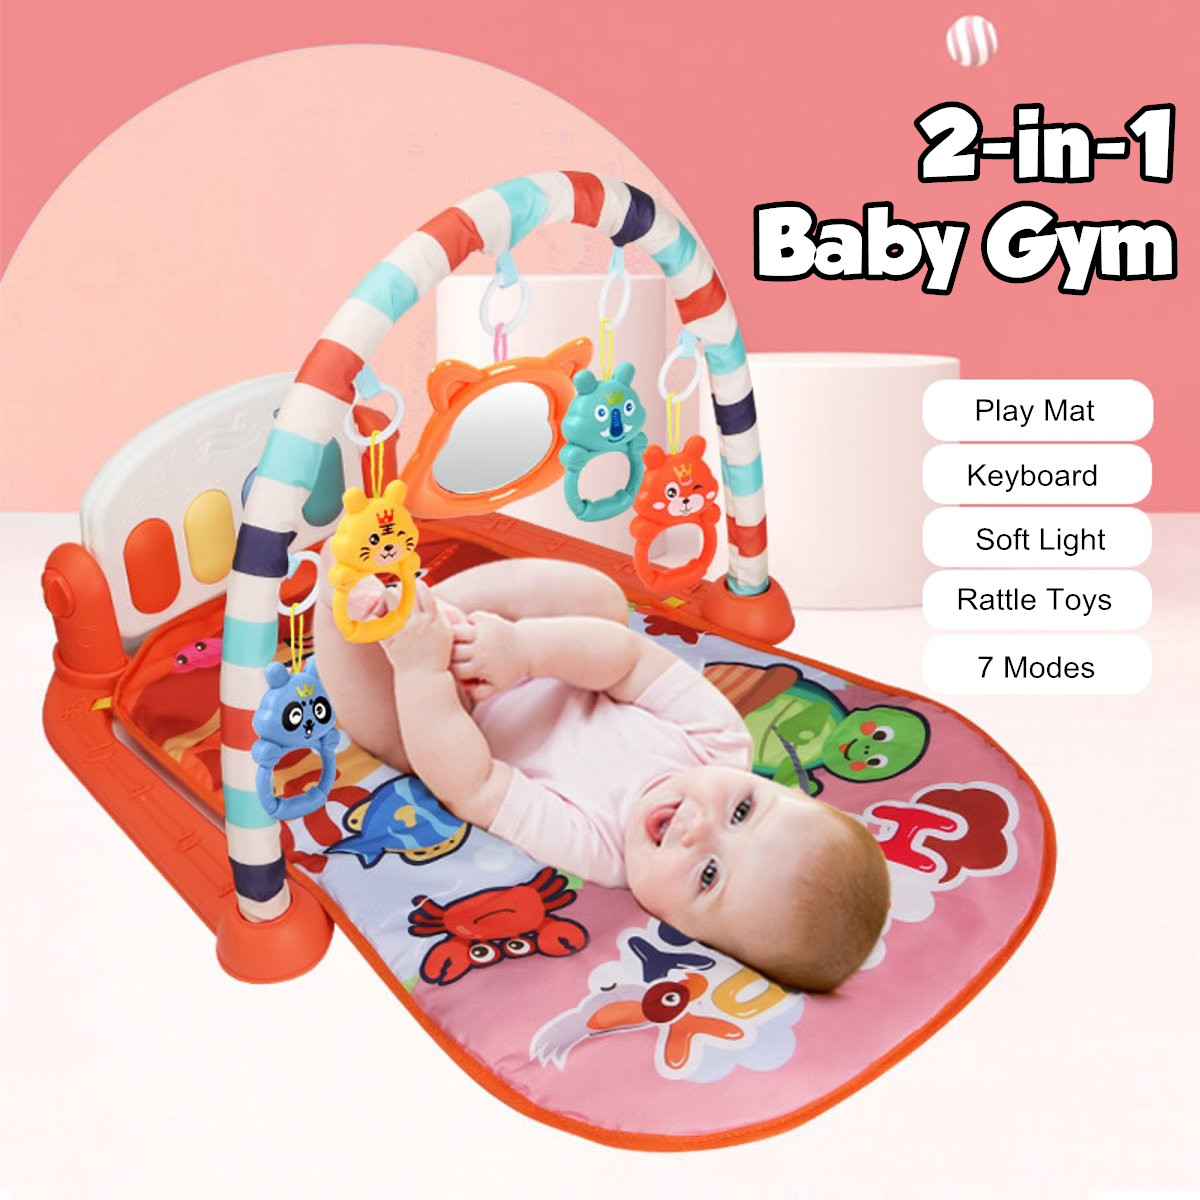 765643CM-2-IN-1-Multi-functional-Baby-Gym-with-Play-Mat-Keyboard-Soft-Light-Rattle-Toys-for-Baby-Gif-1709556-2